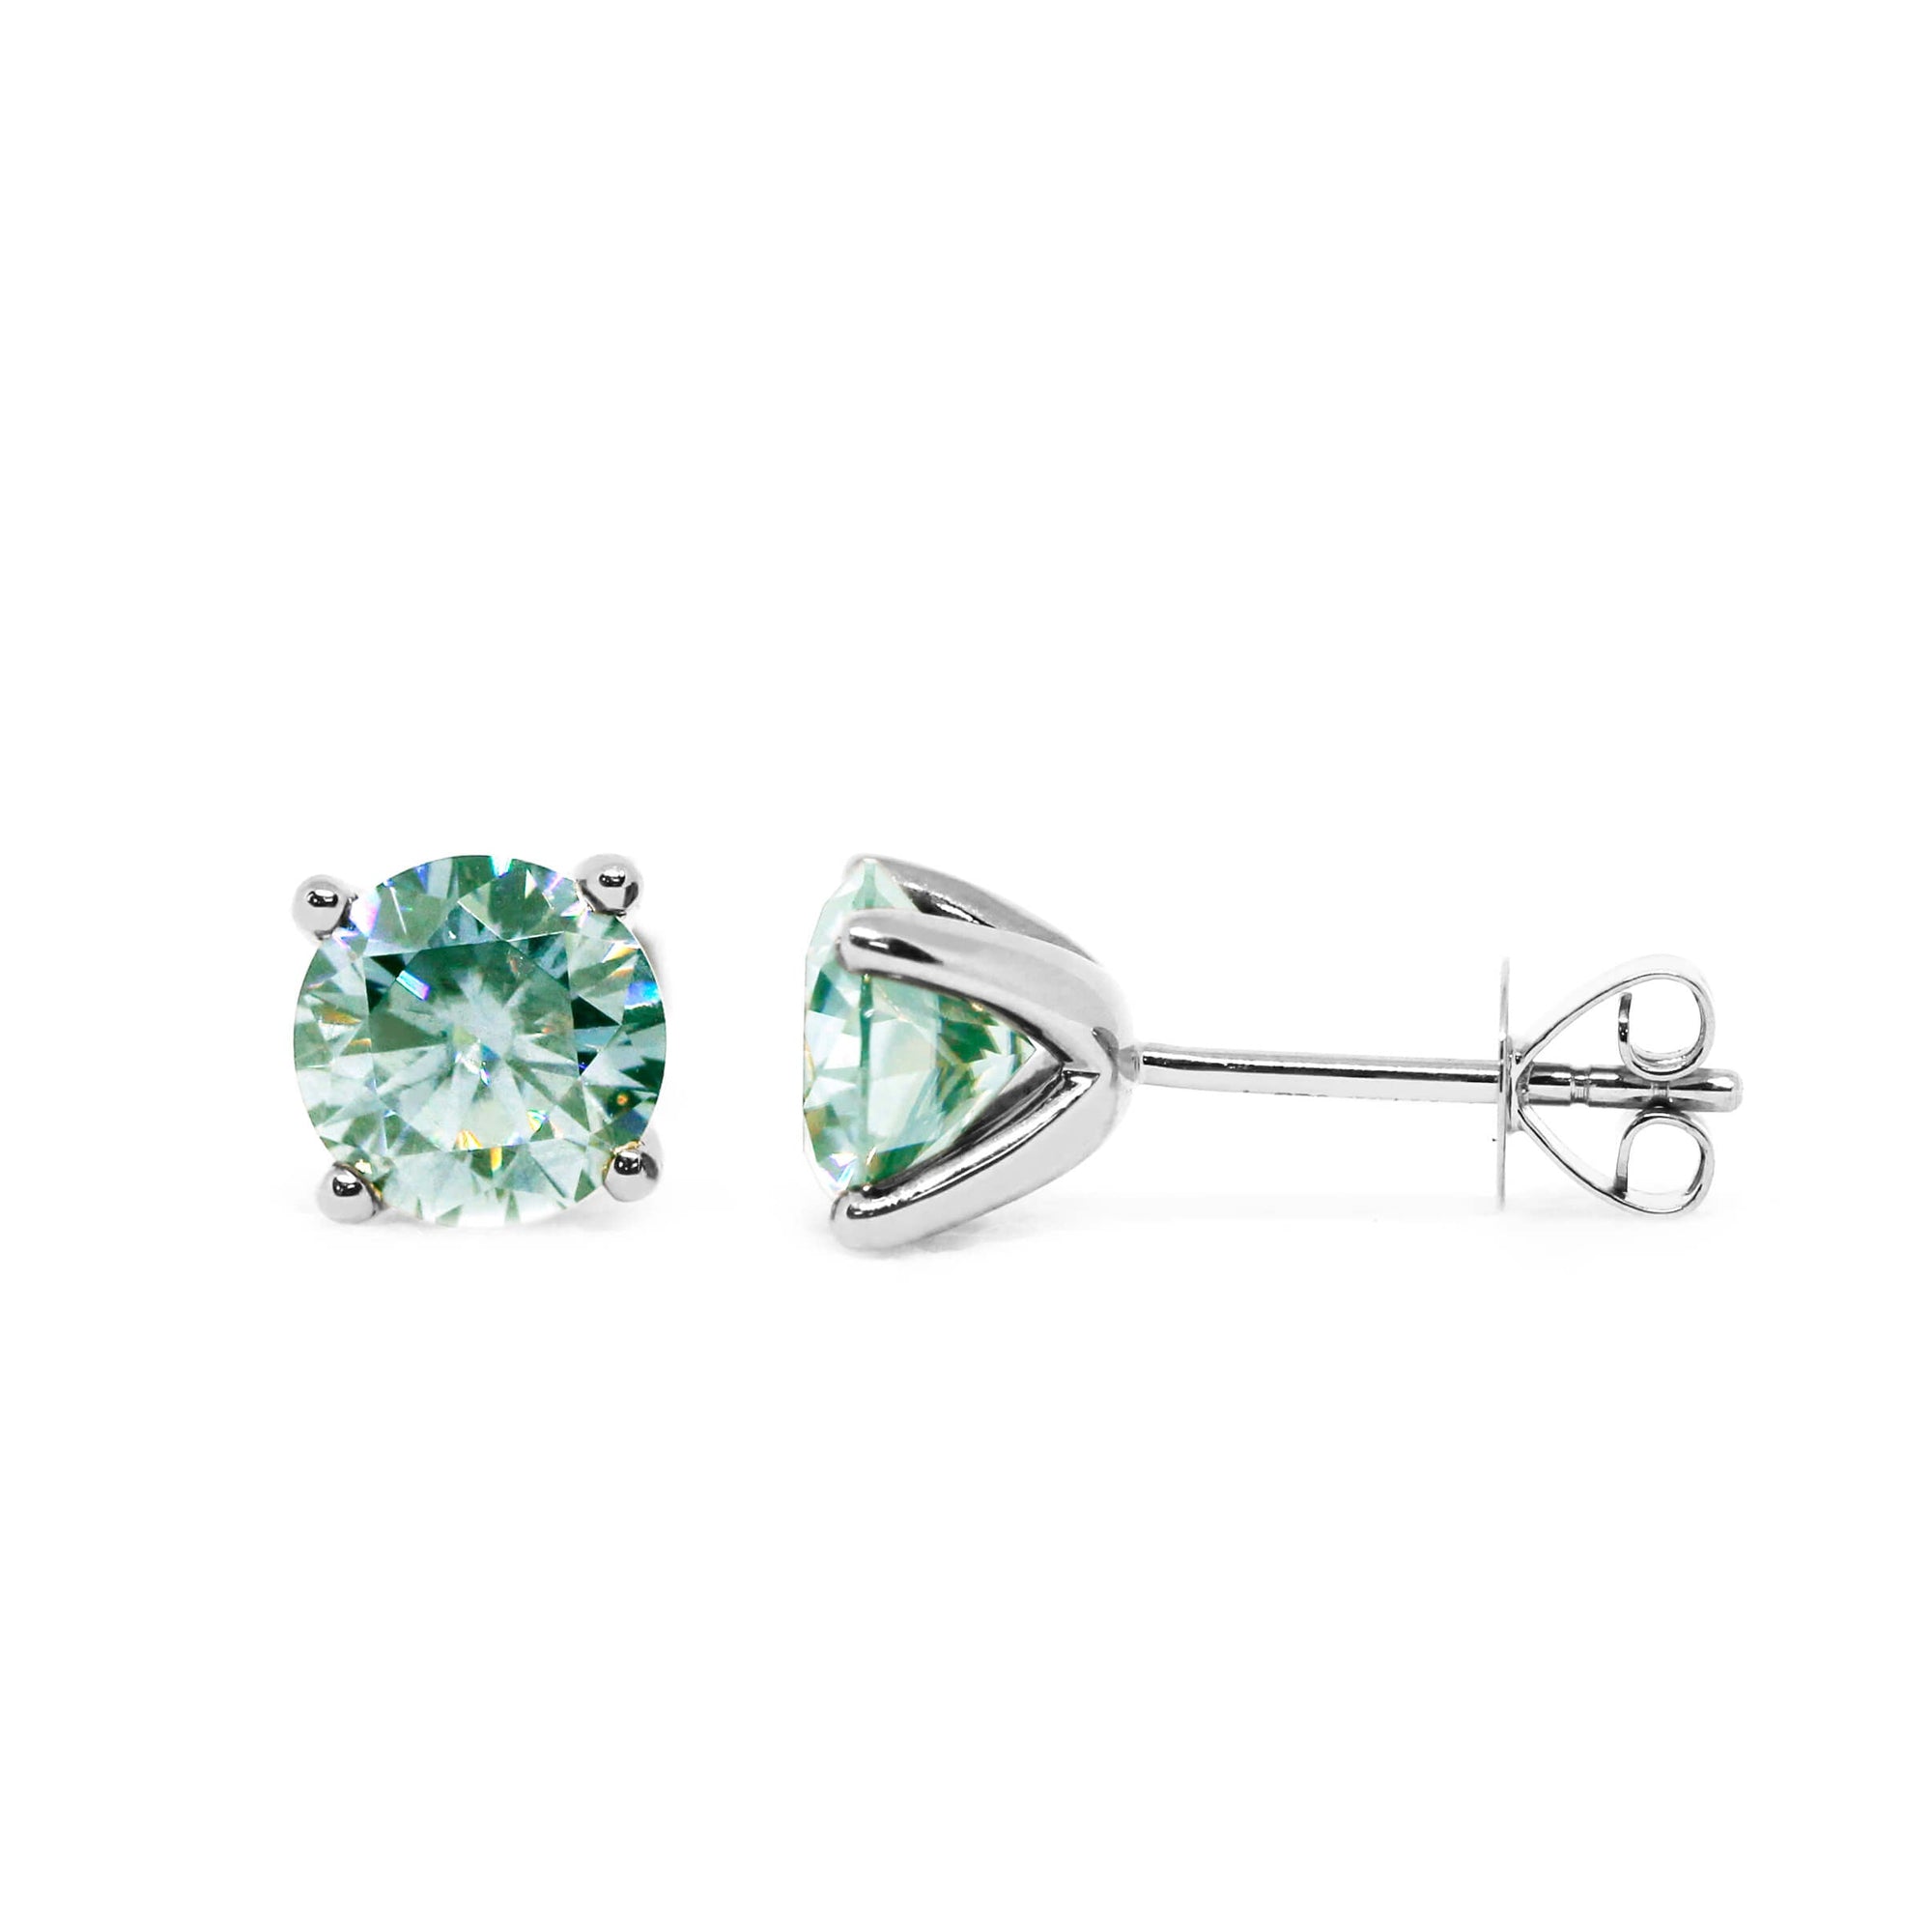 Round Mint Green Moissanite Solitaire in 4 Prong Setting Stud Earrings in 18K White gold - LeCaine Gems